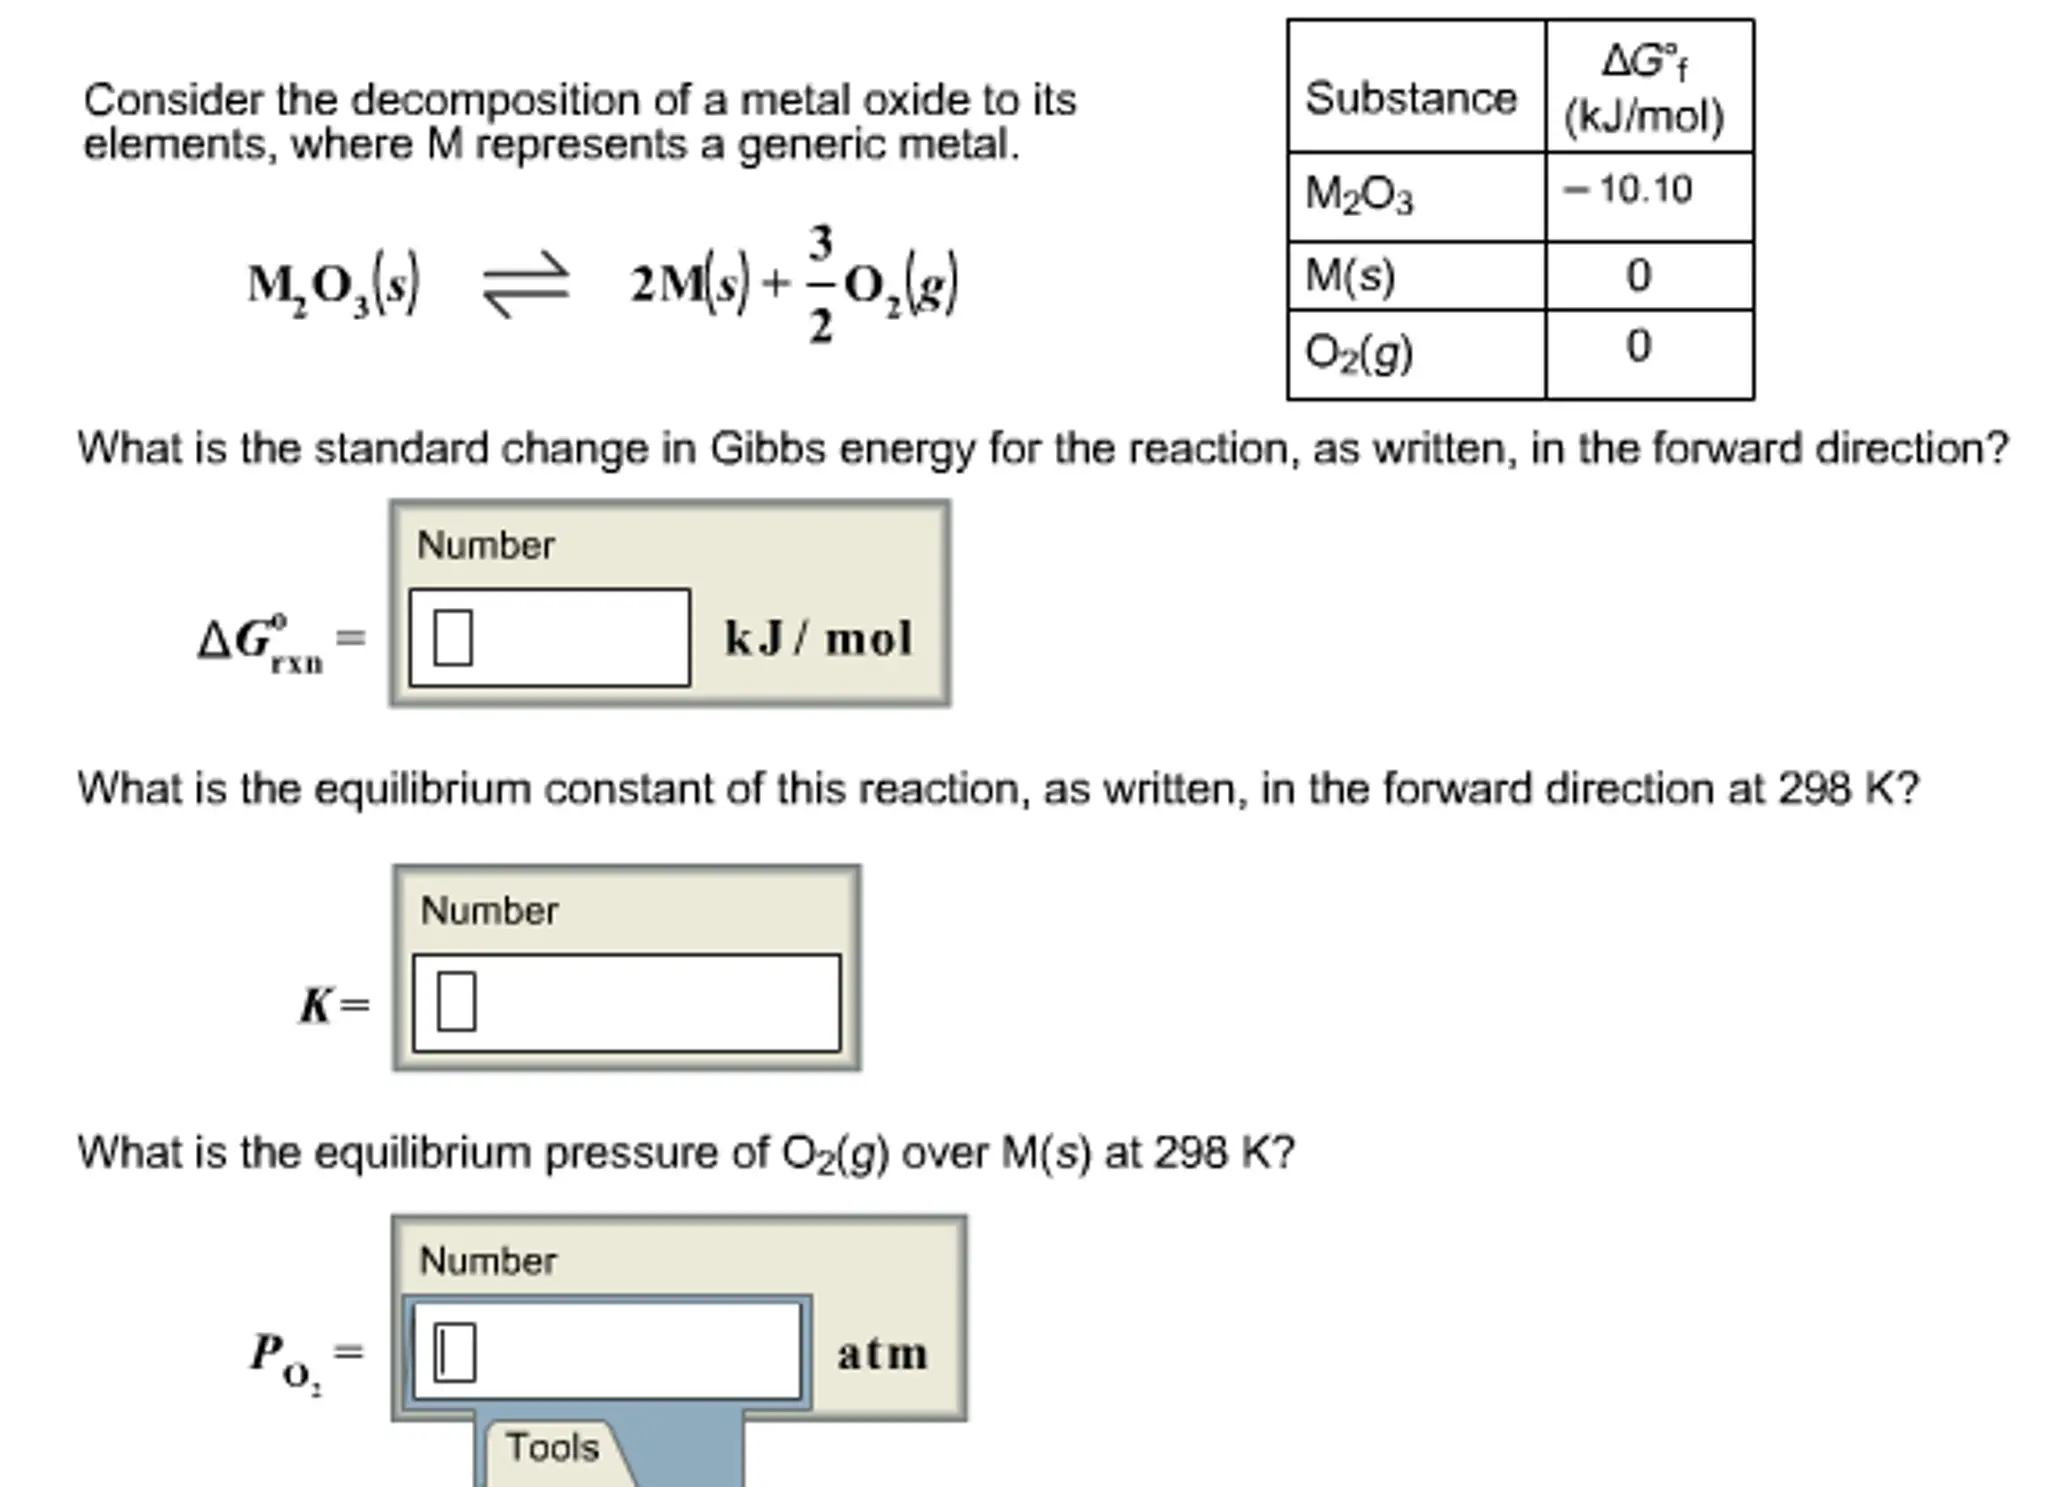 Consider the decomposition of a metal oxide to its elements,
where M represents a generic metal.
What is the standard change in Gibbs energy for the reaction, as
written, in the forward direction?
What is the equilibrium constant of this reaction, as written,
in the forward direction at 298 K?
What is the equilibrium pressure of O2(g) over M(s) at 298
K?

AGOf Substance (kJ/mol) Consider the decomposition of a metal oxide to its elements, where M represents a generic metal. M203 10.10 M(s) 2Mls) -O O2(g) What is the standard change in Gibbs energy for the reaction, as written, in the forward direction? Number AG k J mol rXII What is the equilibrium constant of this reaction, as written, in the forward direction at 298 K? Number What is the equilibrium pressure of O2(g) over M(s) at 298 K? Number atm Tools